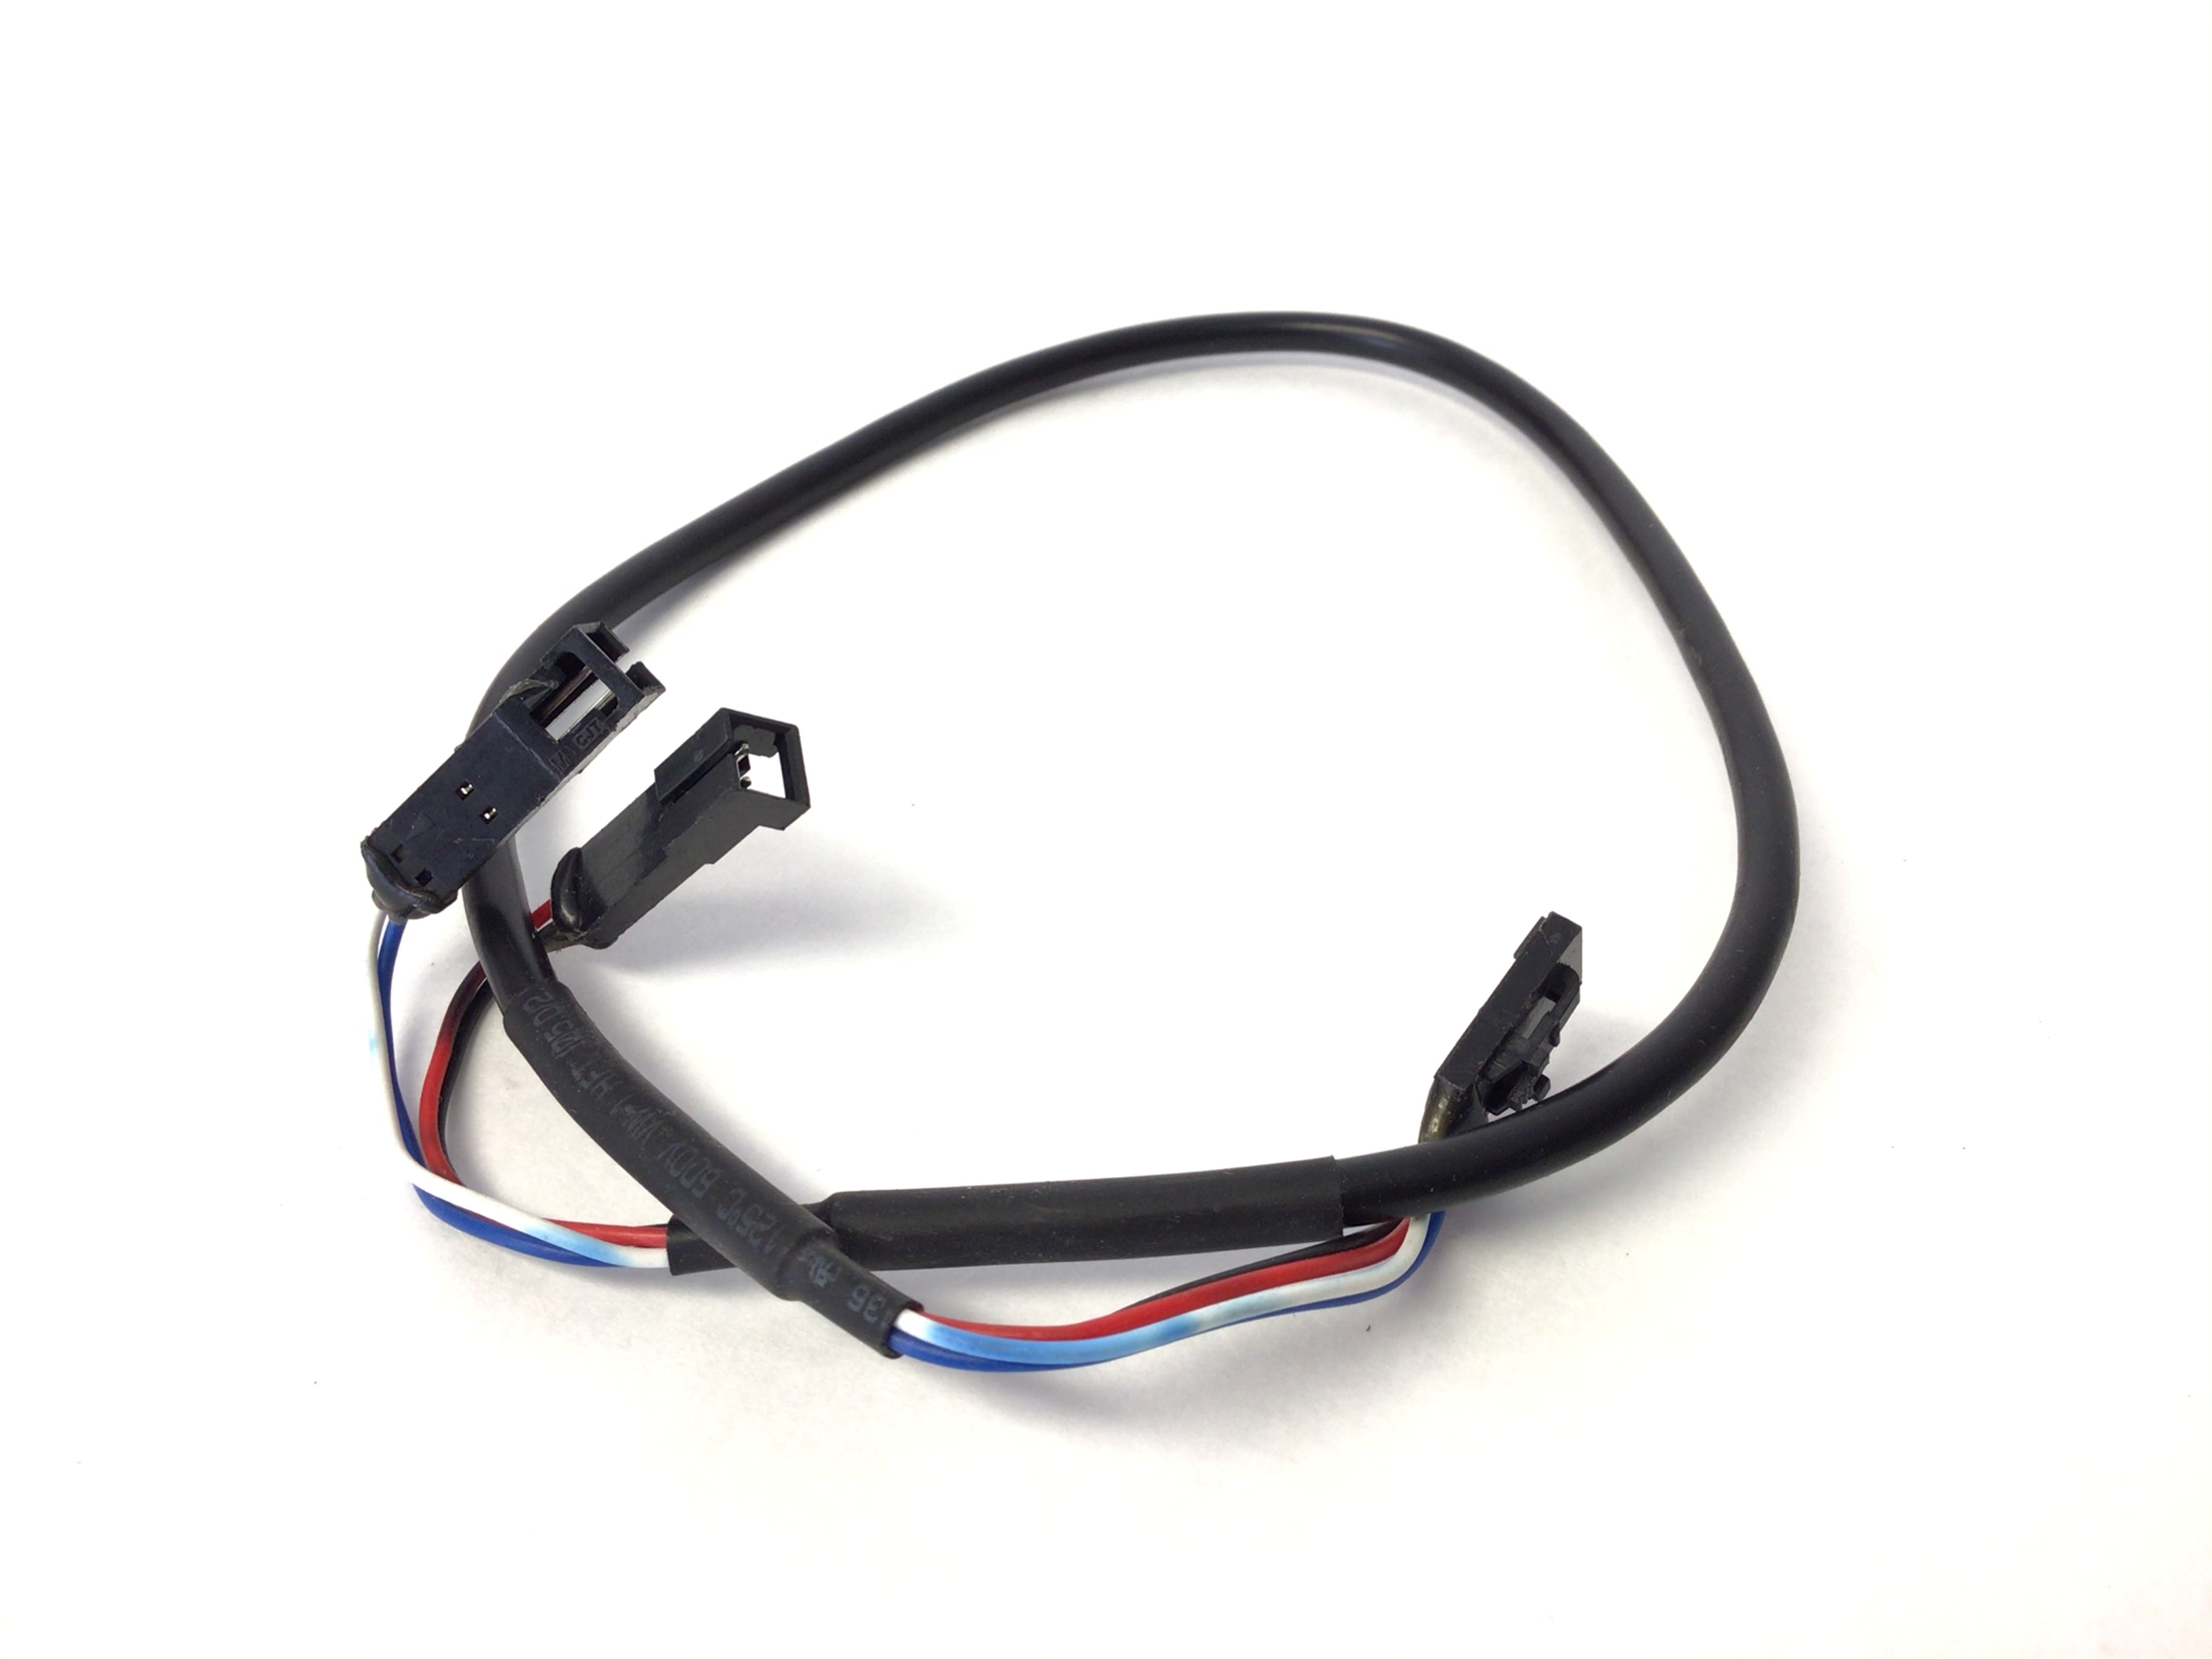 Lower Latera Data Cable Wire Harness Red White Blue Black